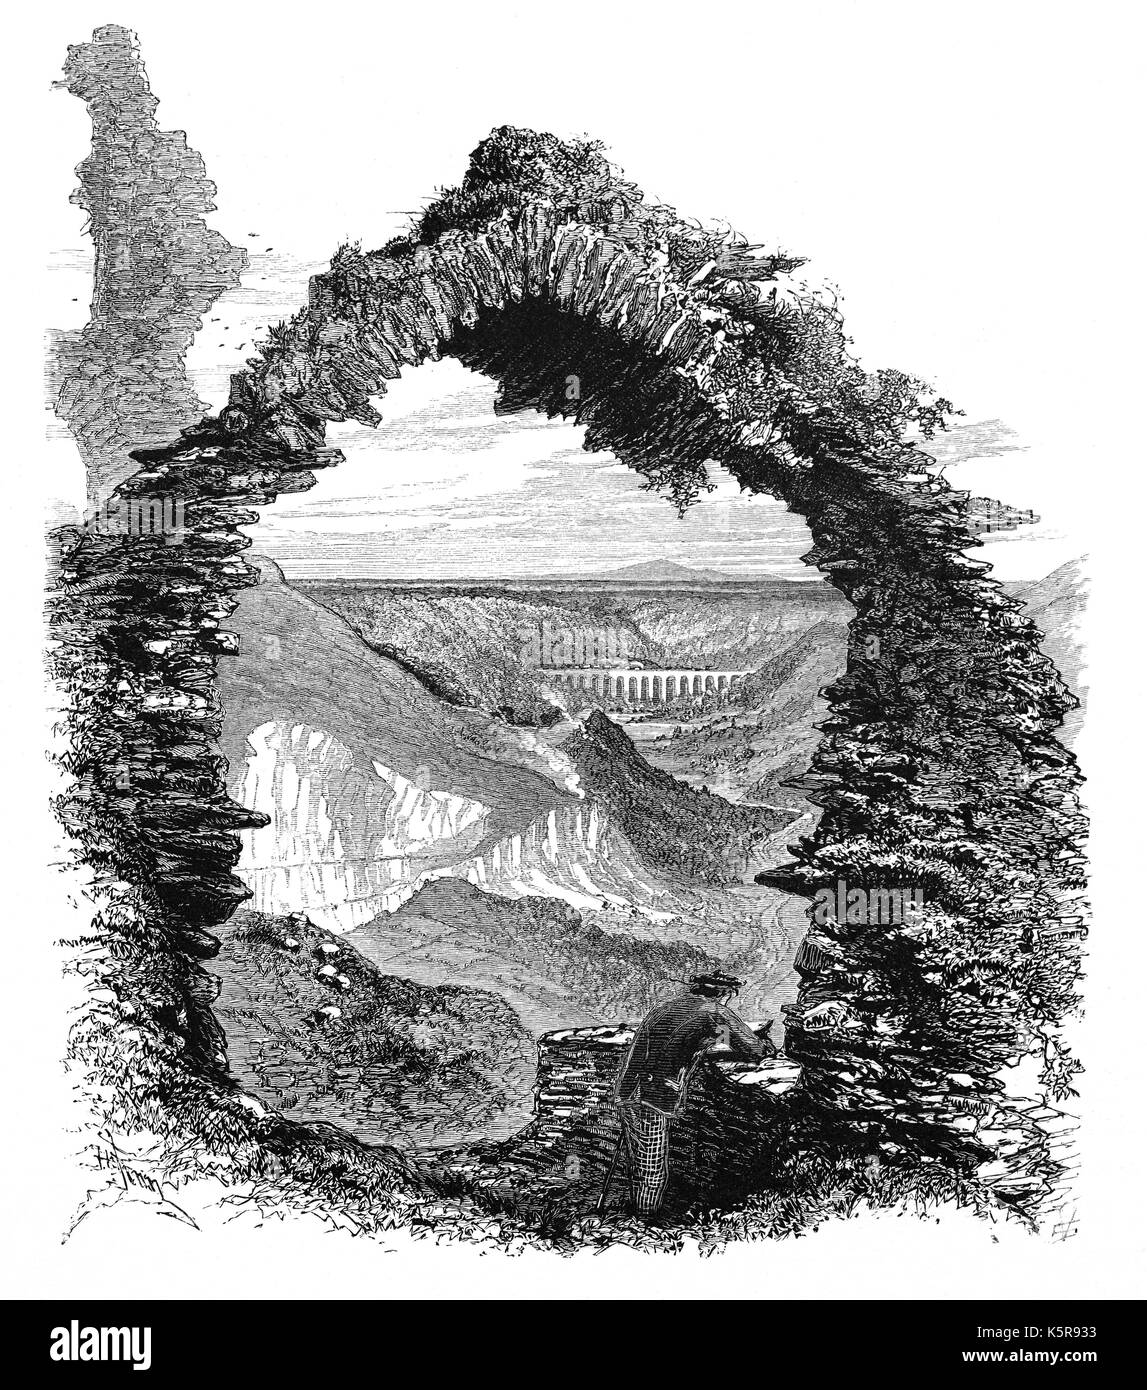 1870: The Pontcysyllte Aqueduct that carries the Llangollen Canal across the River Dee, seen through a ruined arch of Castell Dinas Brân. The medieval castle, probably built in 1260,  occupies a prominent hilltop site above the town of Llangollen in Denbighshire, North Wales. Stock Photo